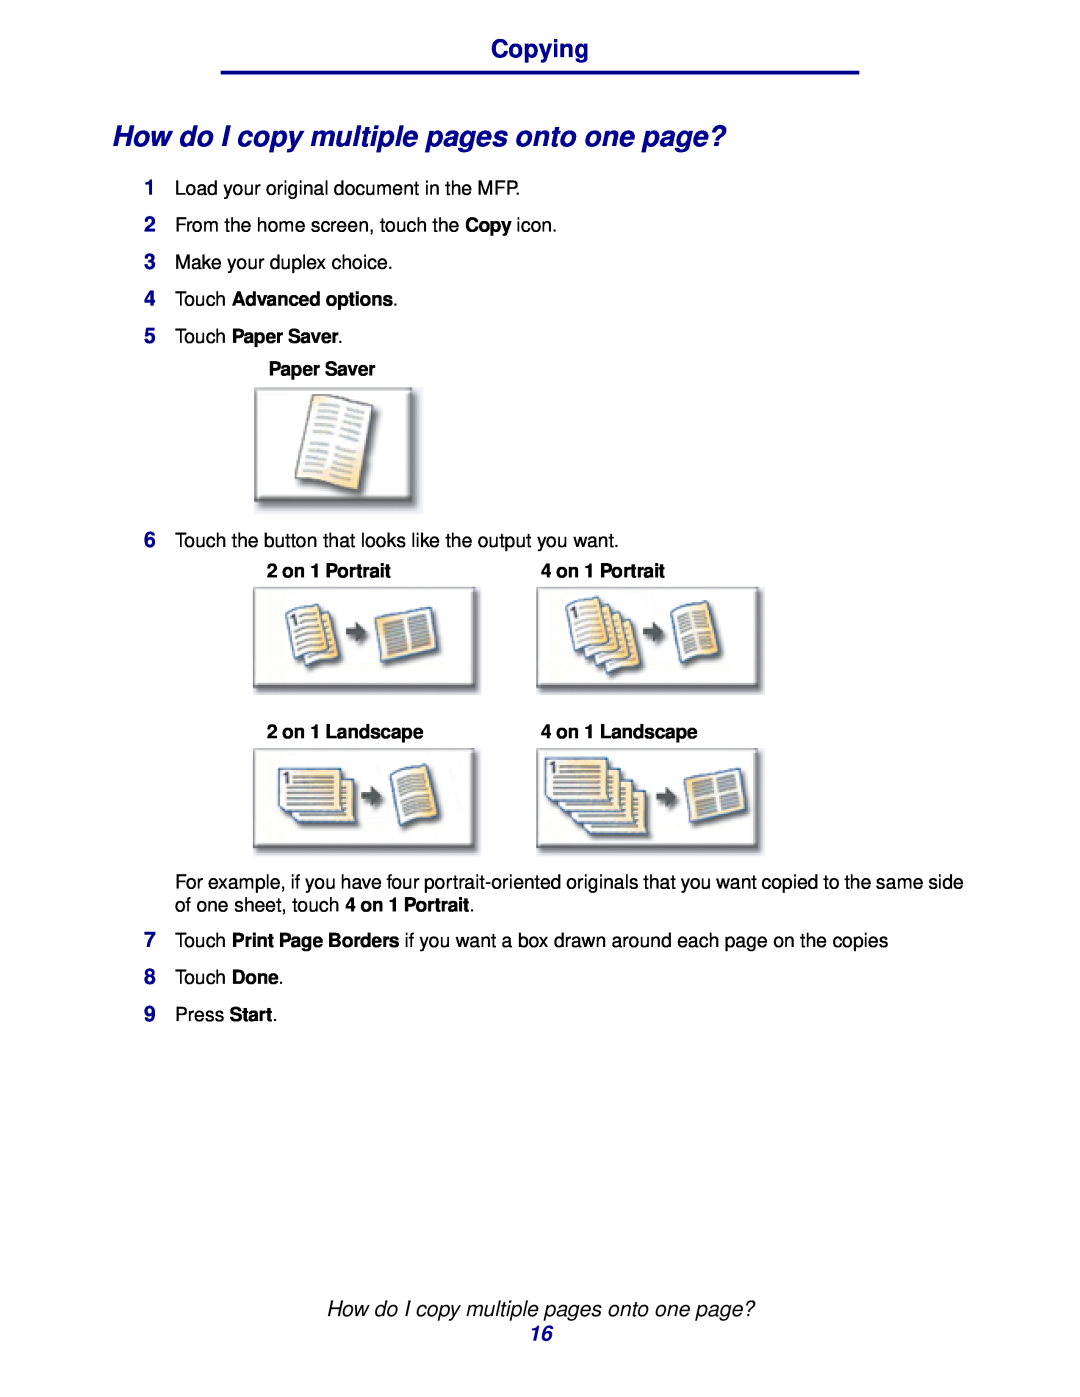 IBM MFP 35 How do I copy multiple pages onto one page?, Touch Advanced options 5 Touch Paper Saver Paper Saver, Copying 